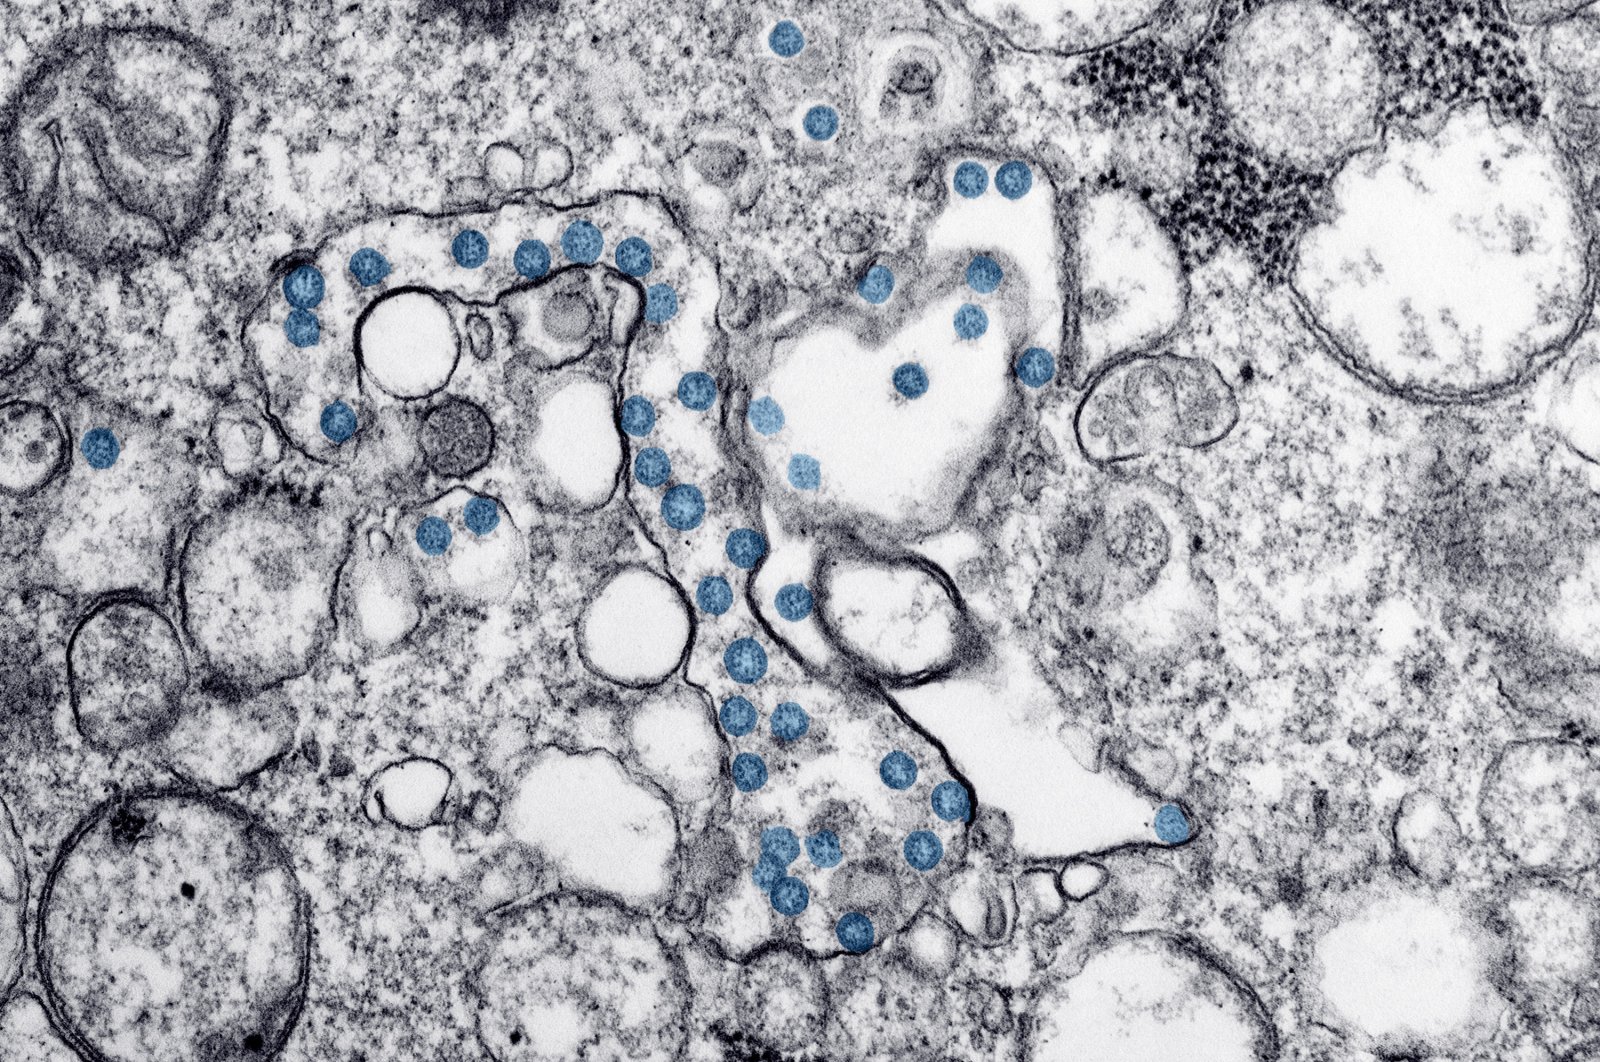 This 2020 electron microscope image made available by the U.S. Centers for Disease Control and Prevention shows the spherical particles of the new coronavirus, colorized blue, from the first U.S. case of COVID-19. (AP Photo)